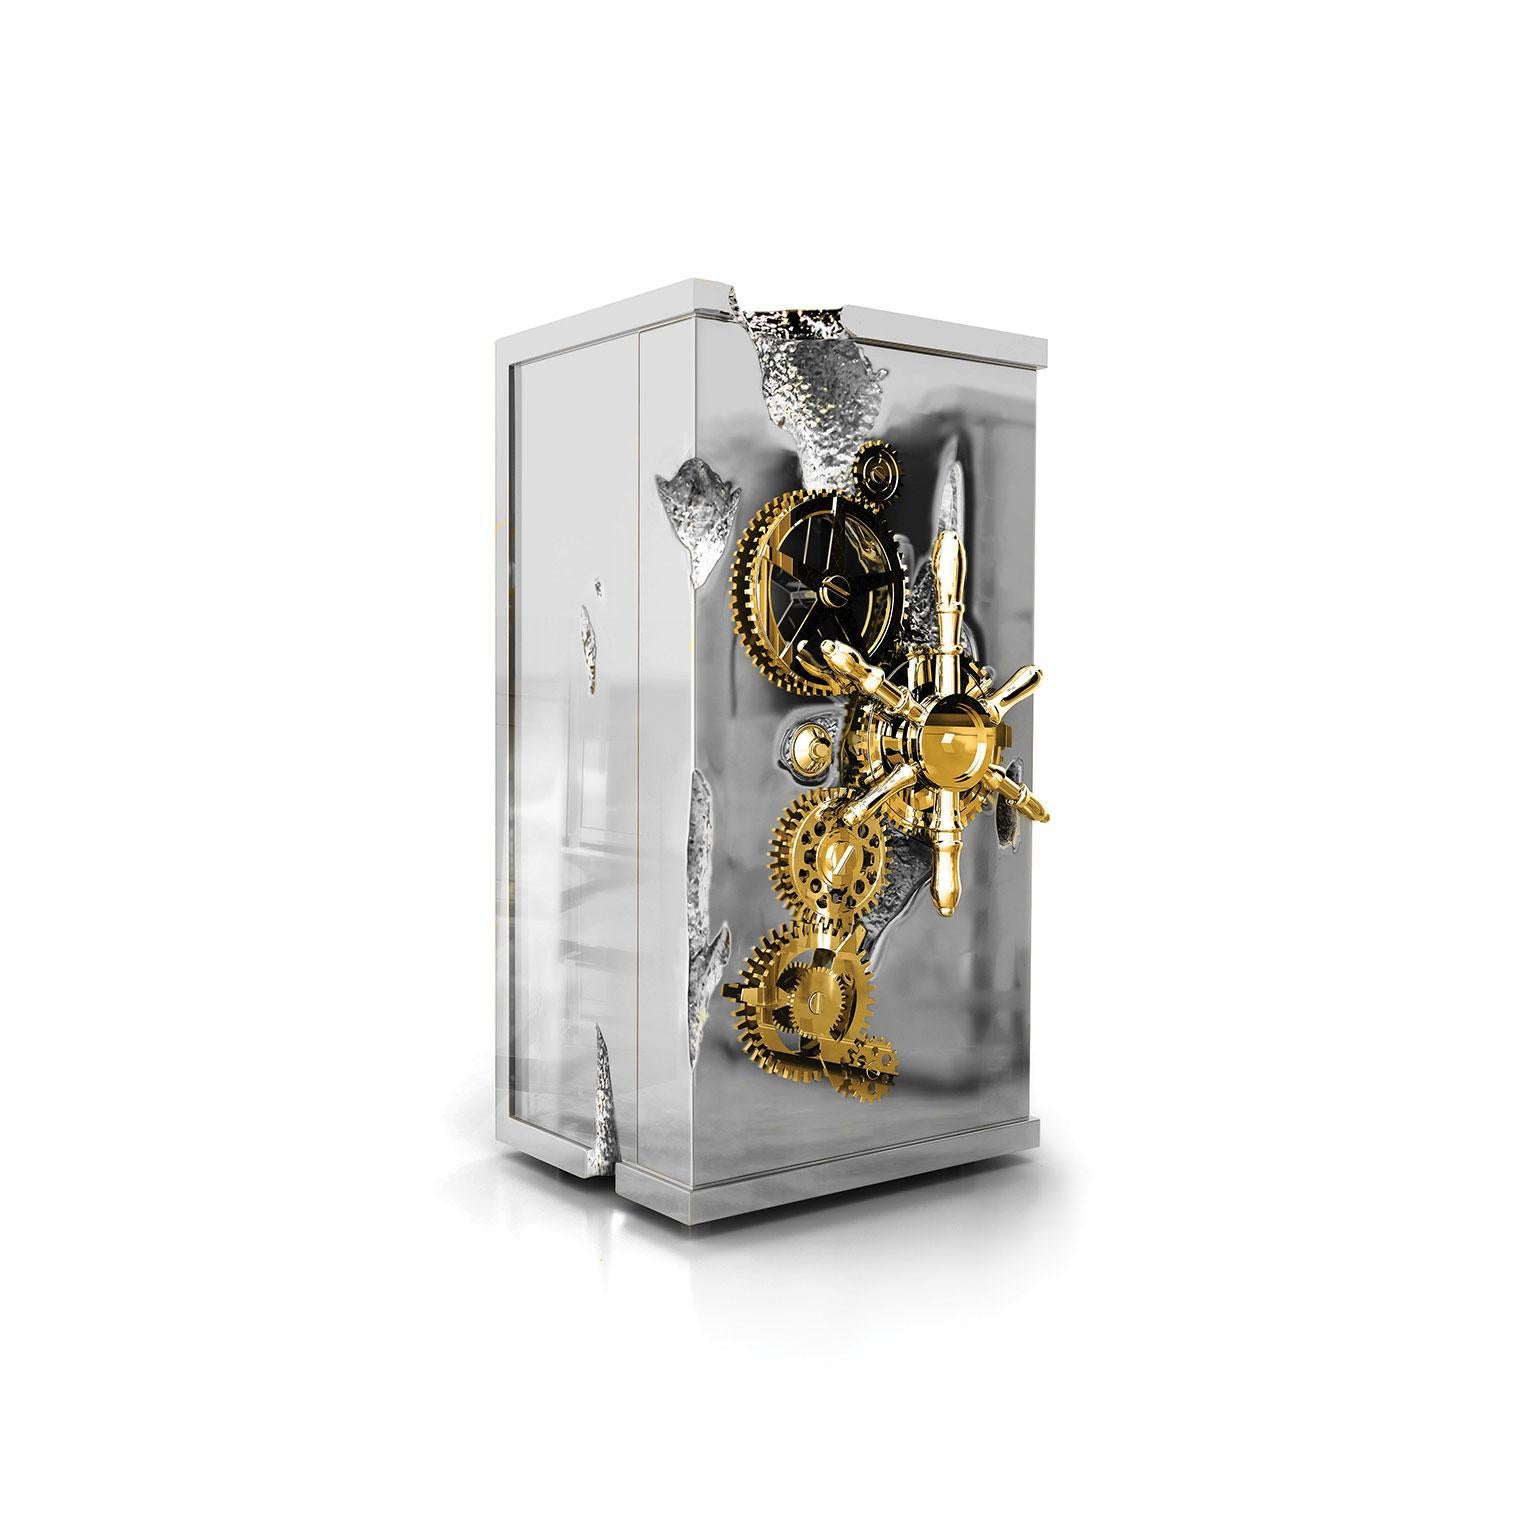 Influenced by the California Gold Rush, the Millionaire Safe is a statement piece designed to cause an impression. Built in a Mahogany structure and gold-plated polished brass frame with several dents, it sparks both interest and imagination